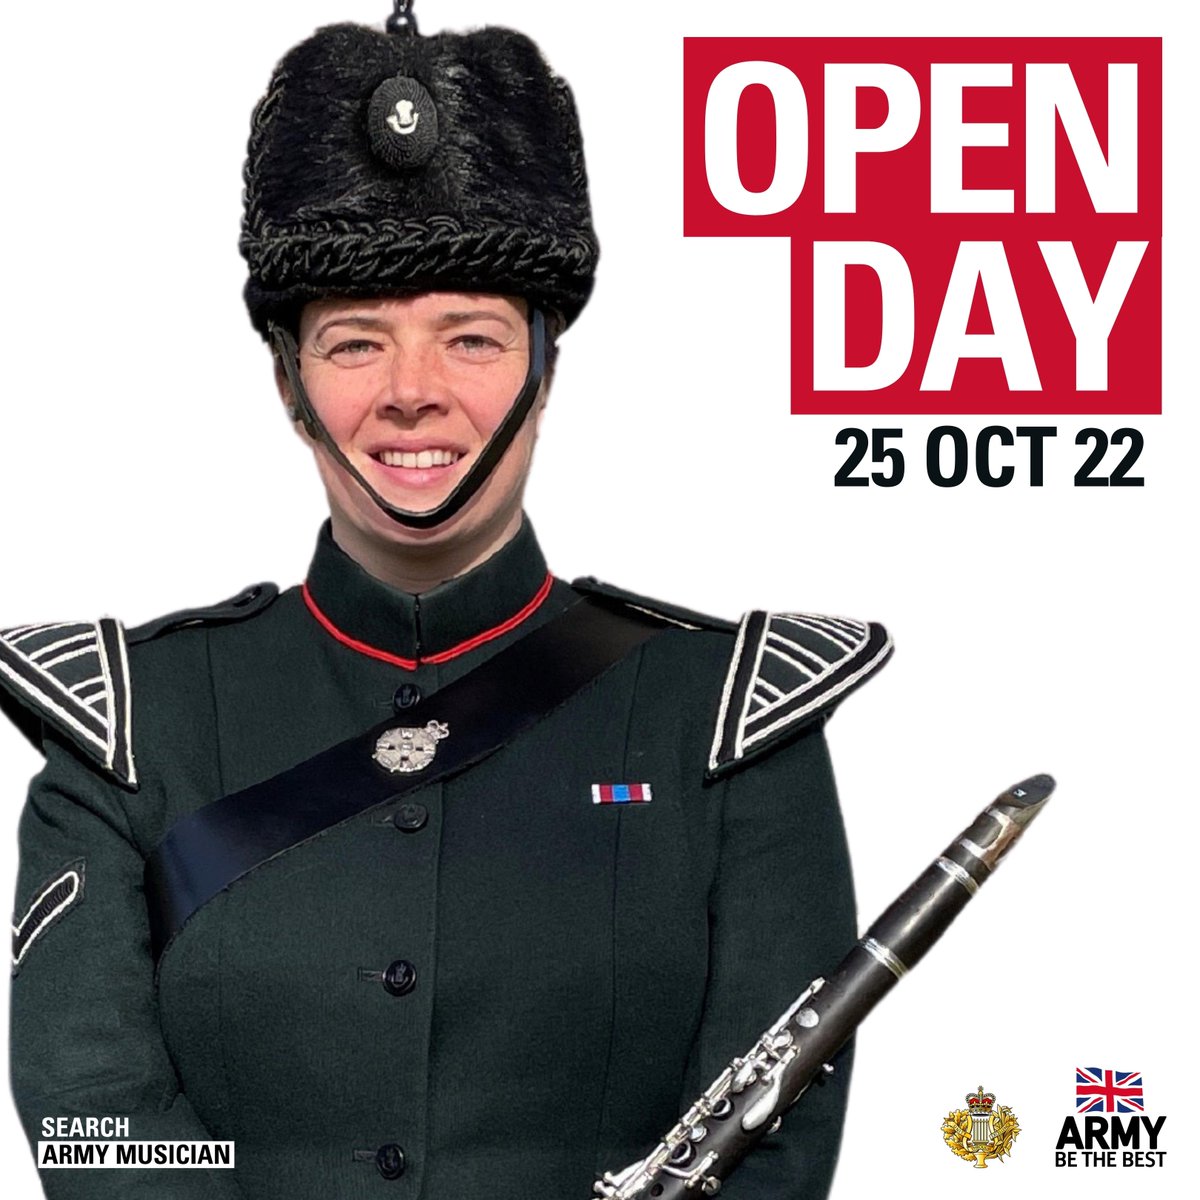 @RIFLESband is hosting an Open Day 25 Oct🎺 Experience a day in the life of a professional Army musician, play alongside members of the band.🥁 The Open Day is open to brass, woodwind & percussion players aged 15-34. To register email: Laura.Soall100@mod.gov.uk👈 @Army_Arts